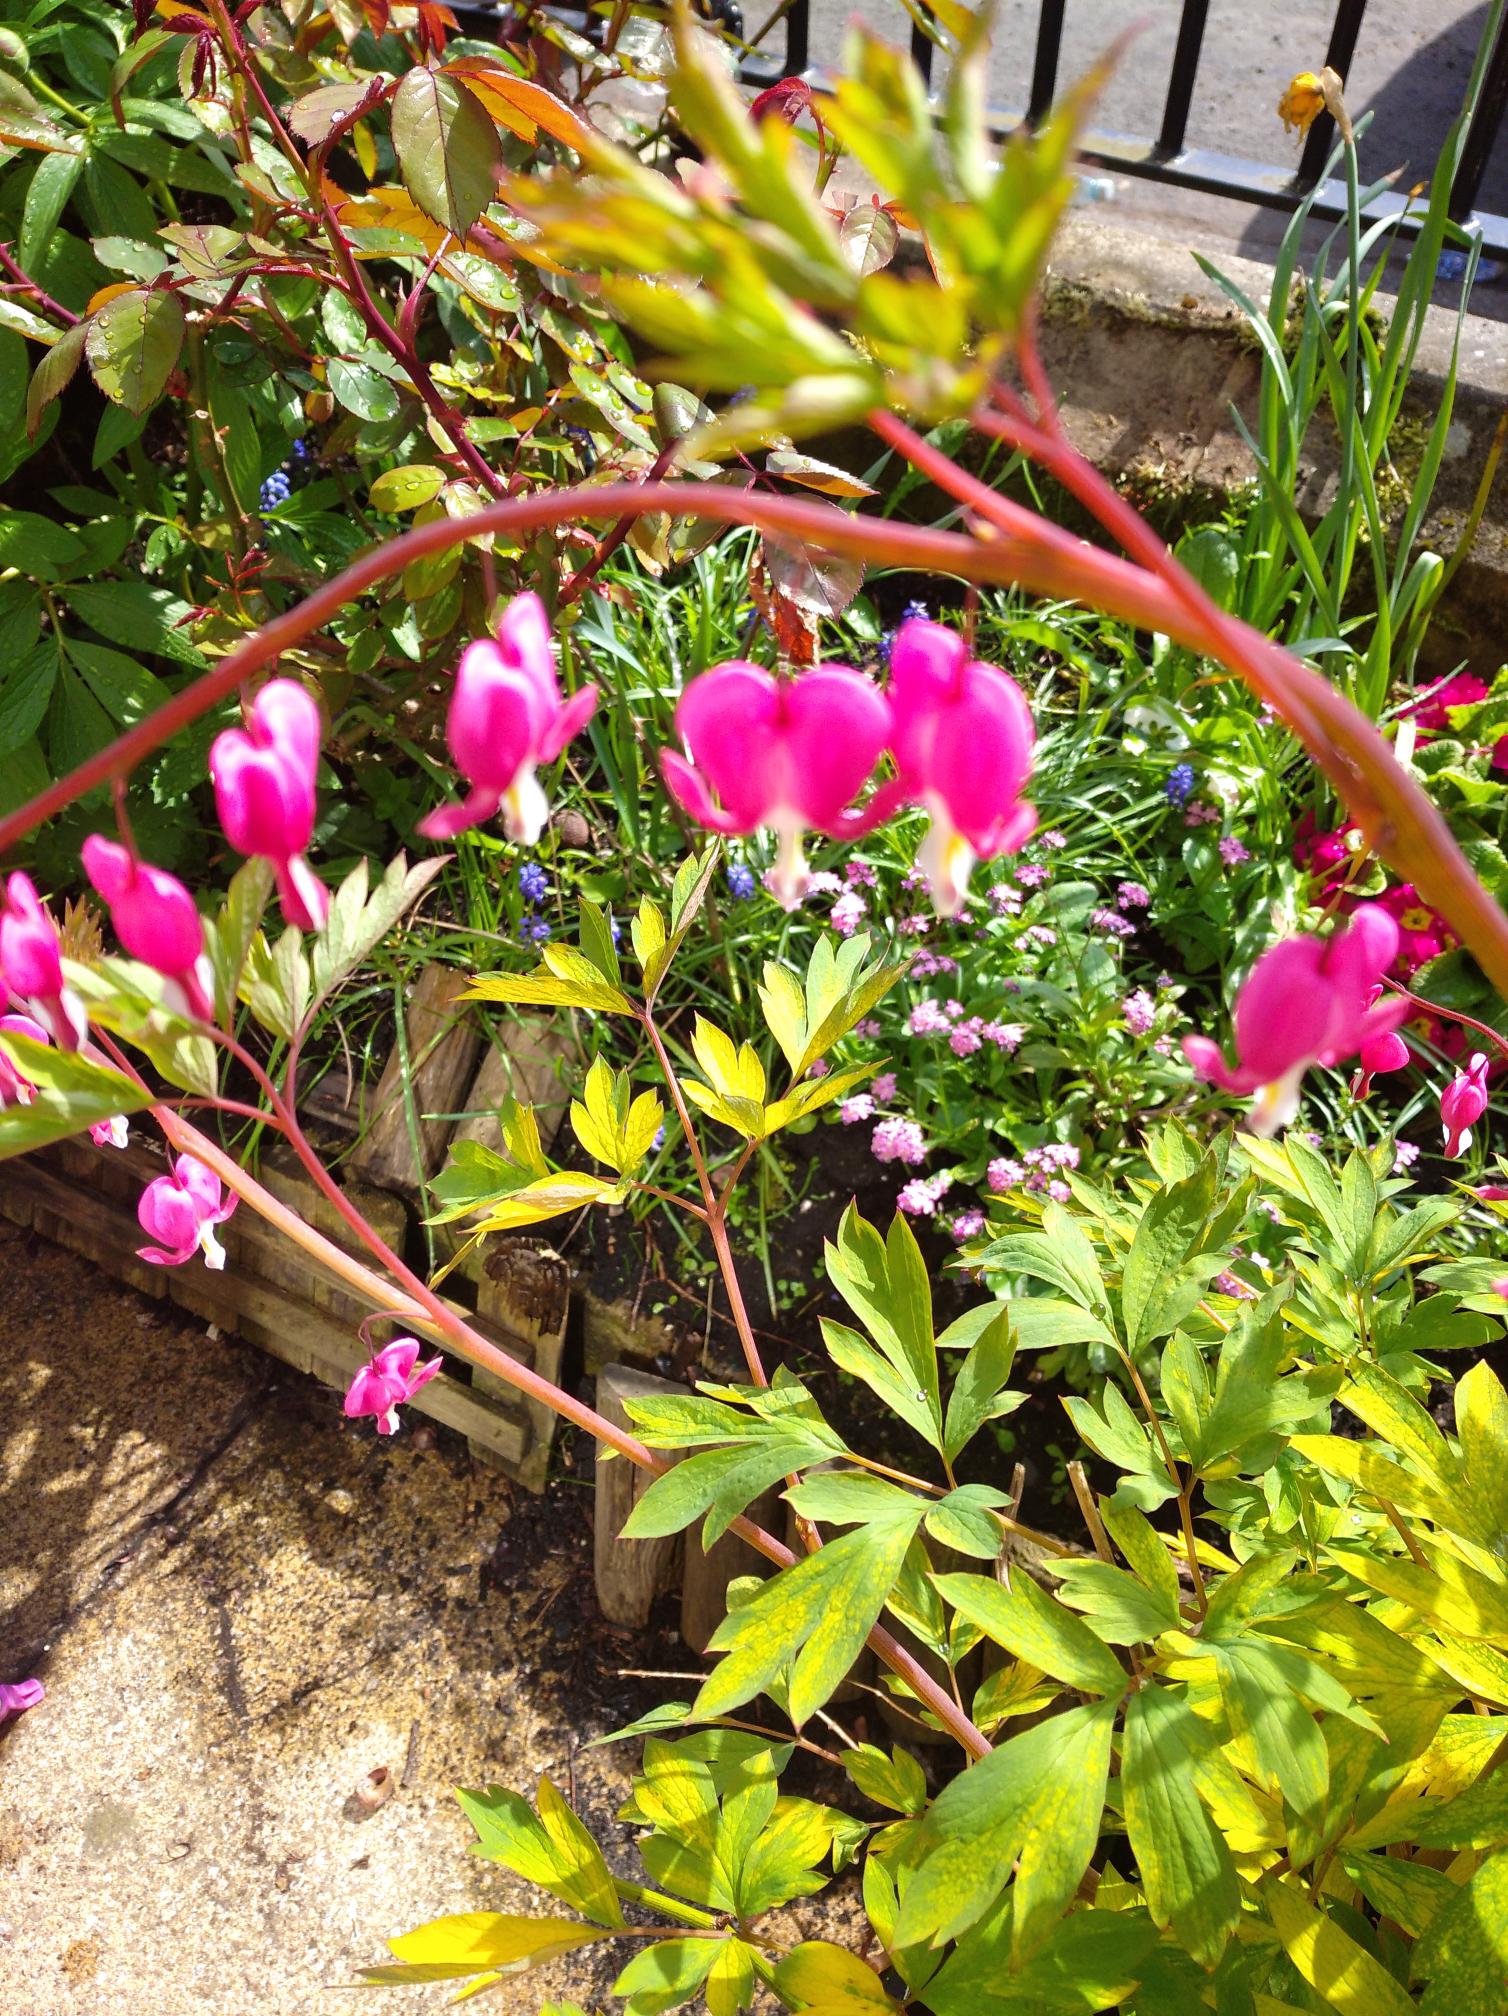 A photograph of a corner of a garden taken from above. In the foreground, there is an out-of-focus close-up view of a plant stem and hanging from it is a series of small, pink heart-shaped flowers descending towards the ground. Underneath this plant, there are some man-made, wooden flowerbeds populated by a variety of leafy and flowery plants. A glimpse of black railing next to these flowerbeds inform the viewer that the garden is situated on the edge of a road.